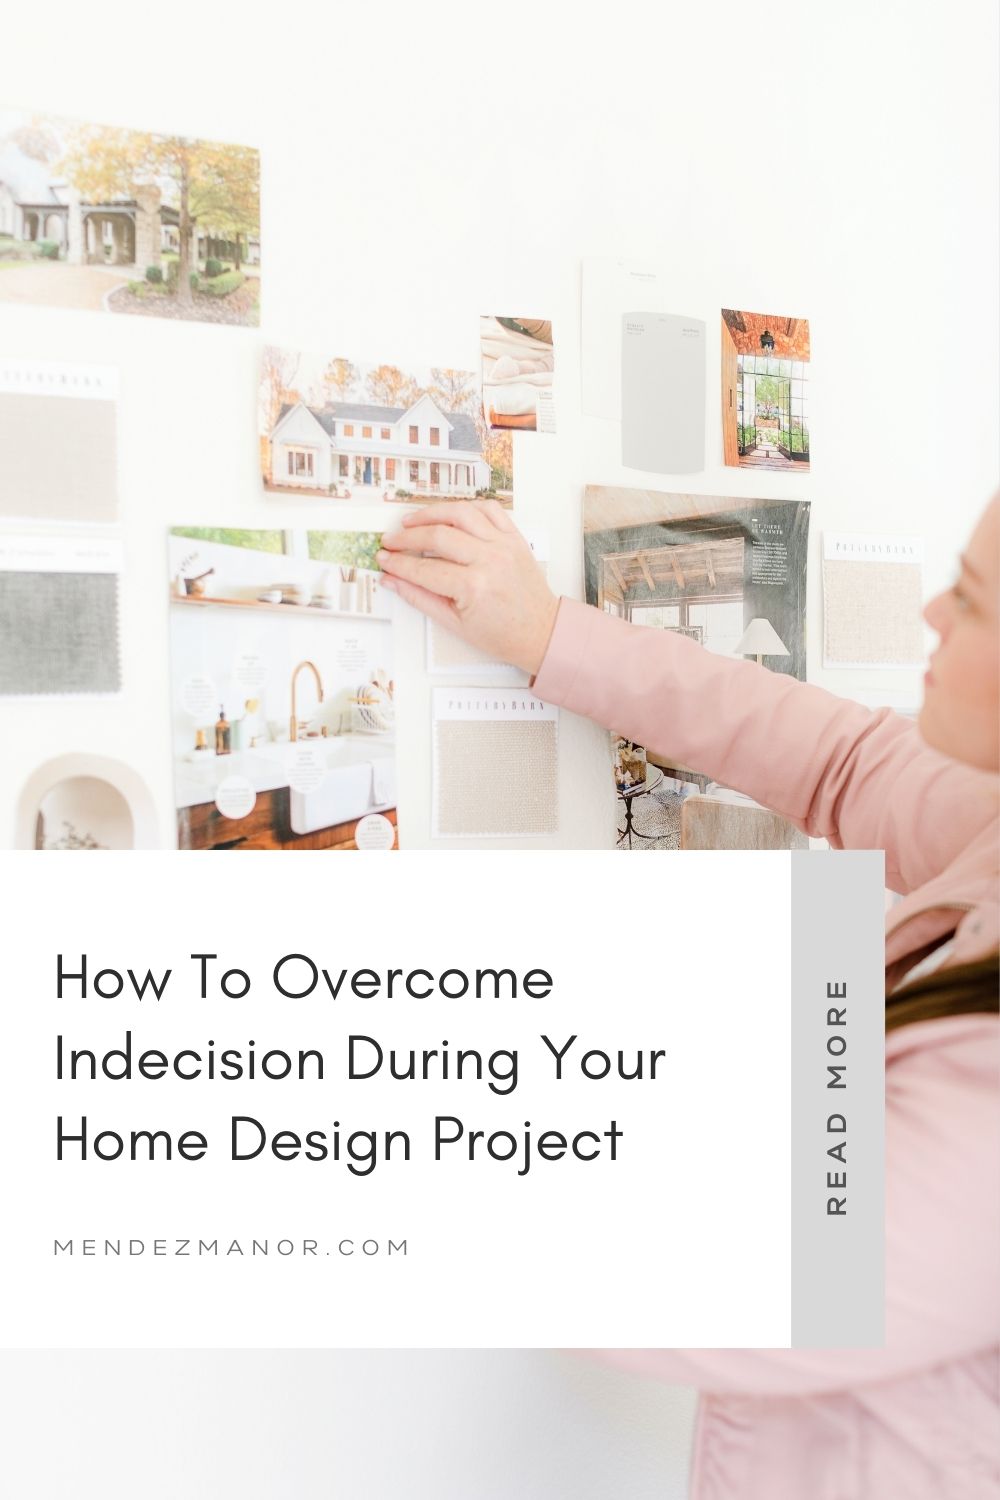 How To Overcome Indecision During Your Home Design Project: 8 Tips for Getting through your design project without stressing about every little thing